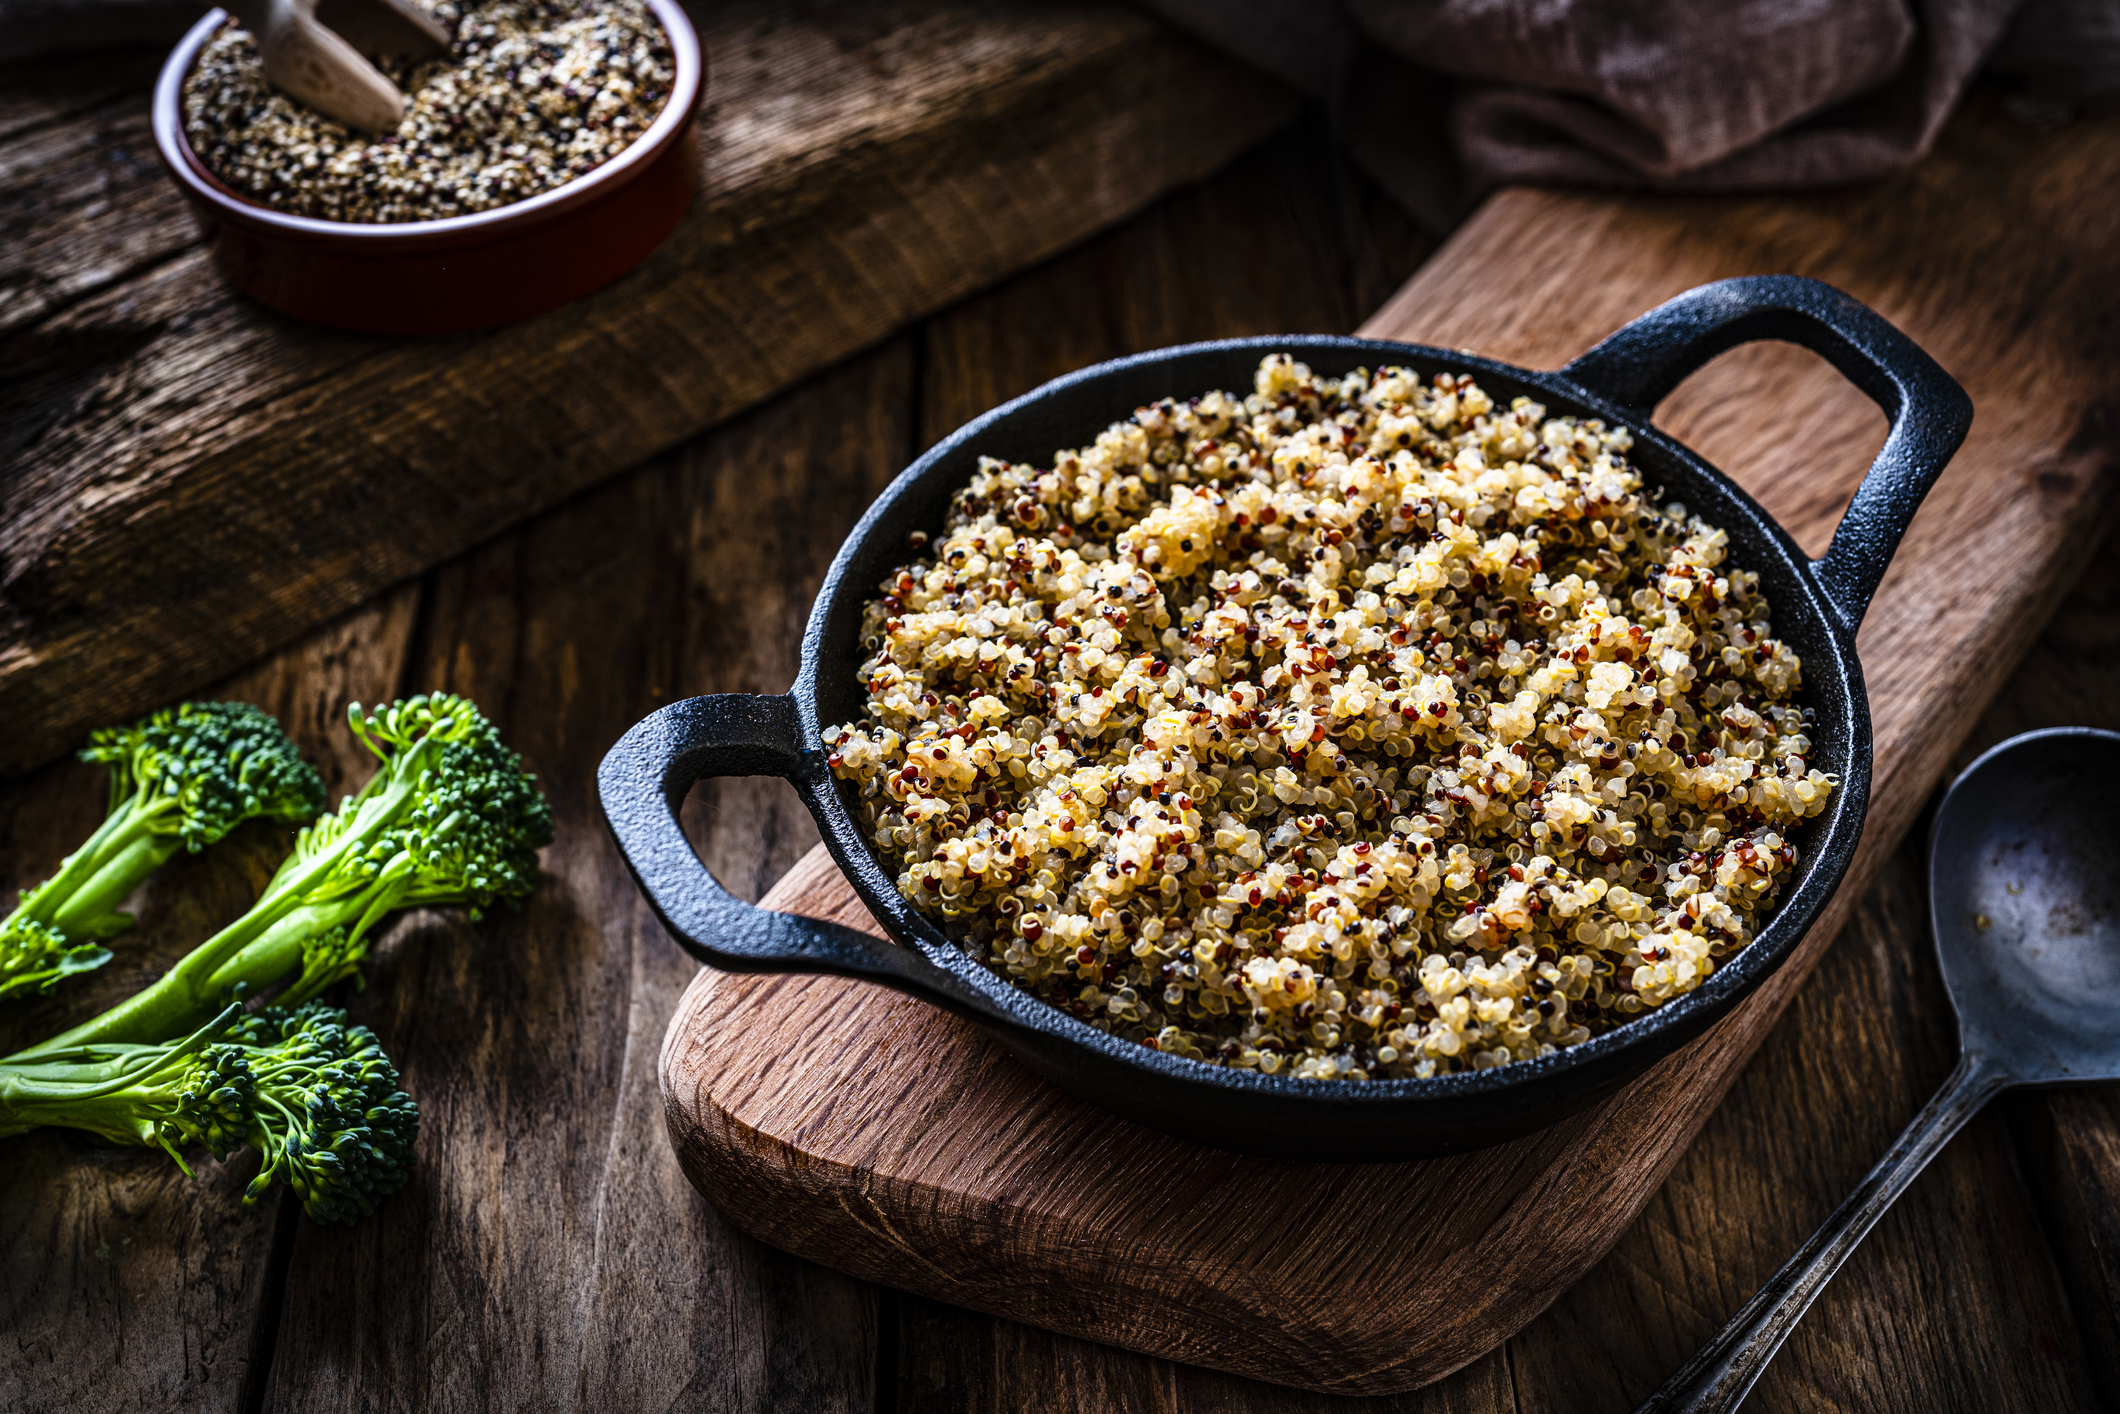 Is Quinoa Good for PCOS?